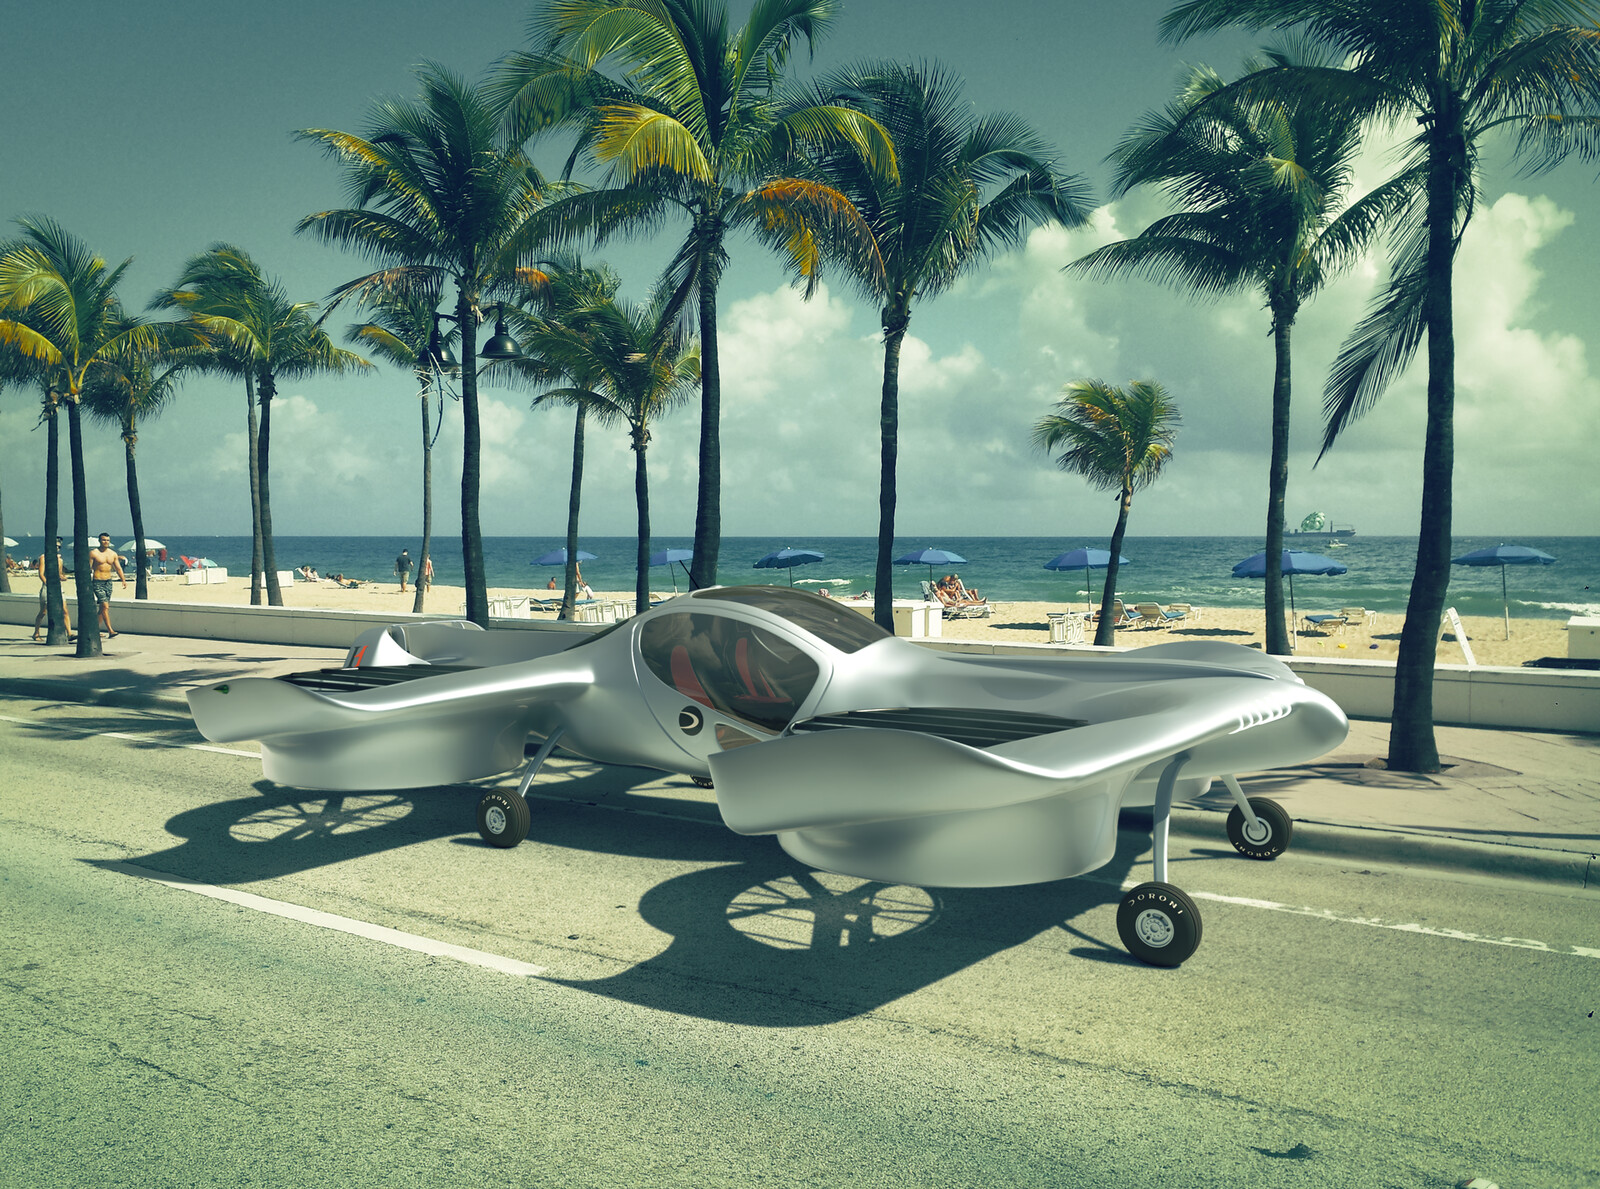 Parked next to Miami Beach - 3D vehicle comped over a photo via the use of FSpy